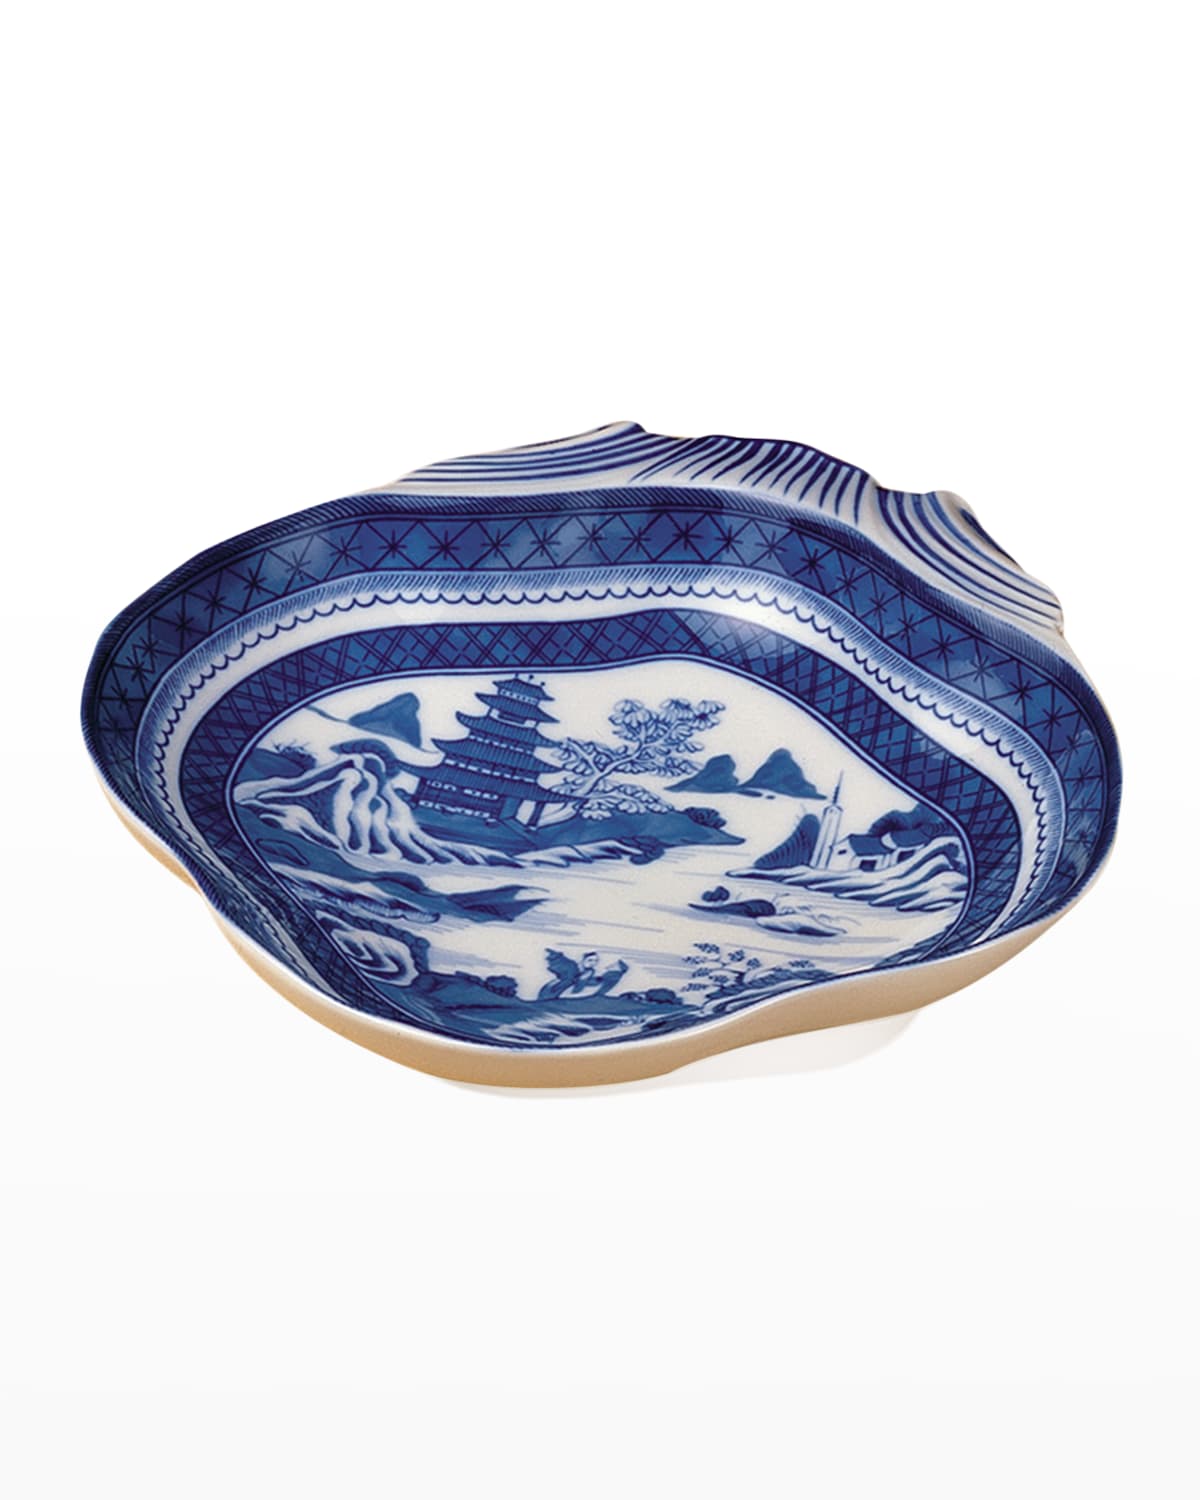 MOTTAHEDEH BLUE CANTON SHELL-SHAPED SERVING DISH